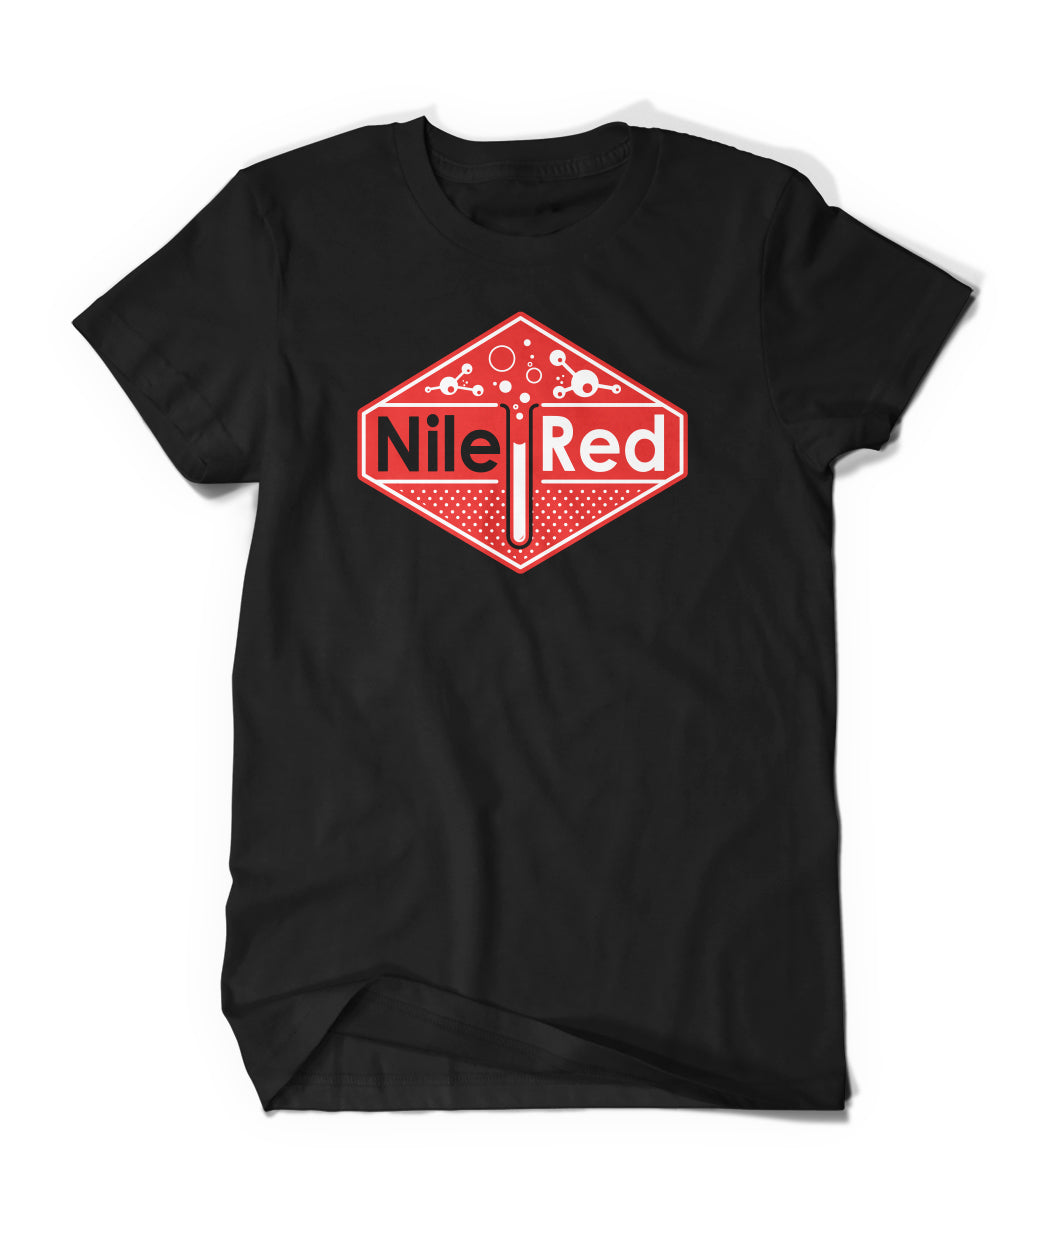 A black t-shirt with a red diamond that reads 